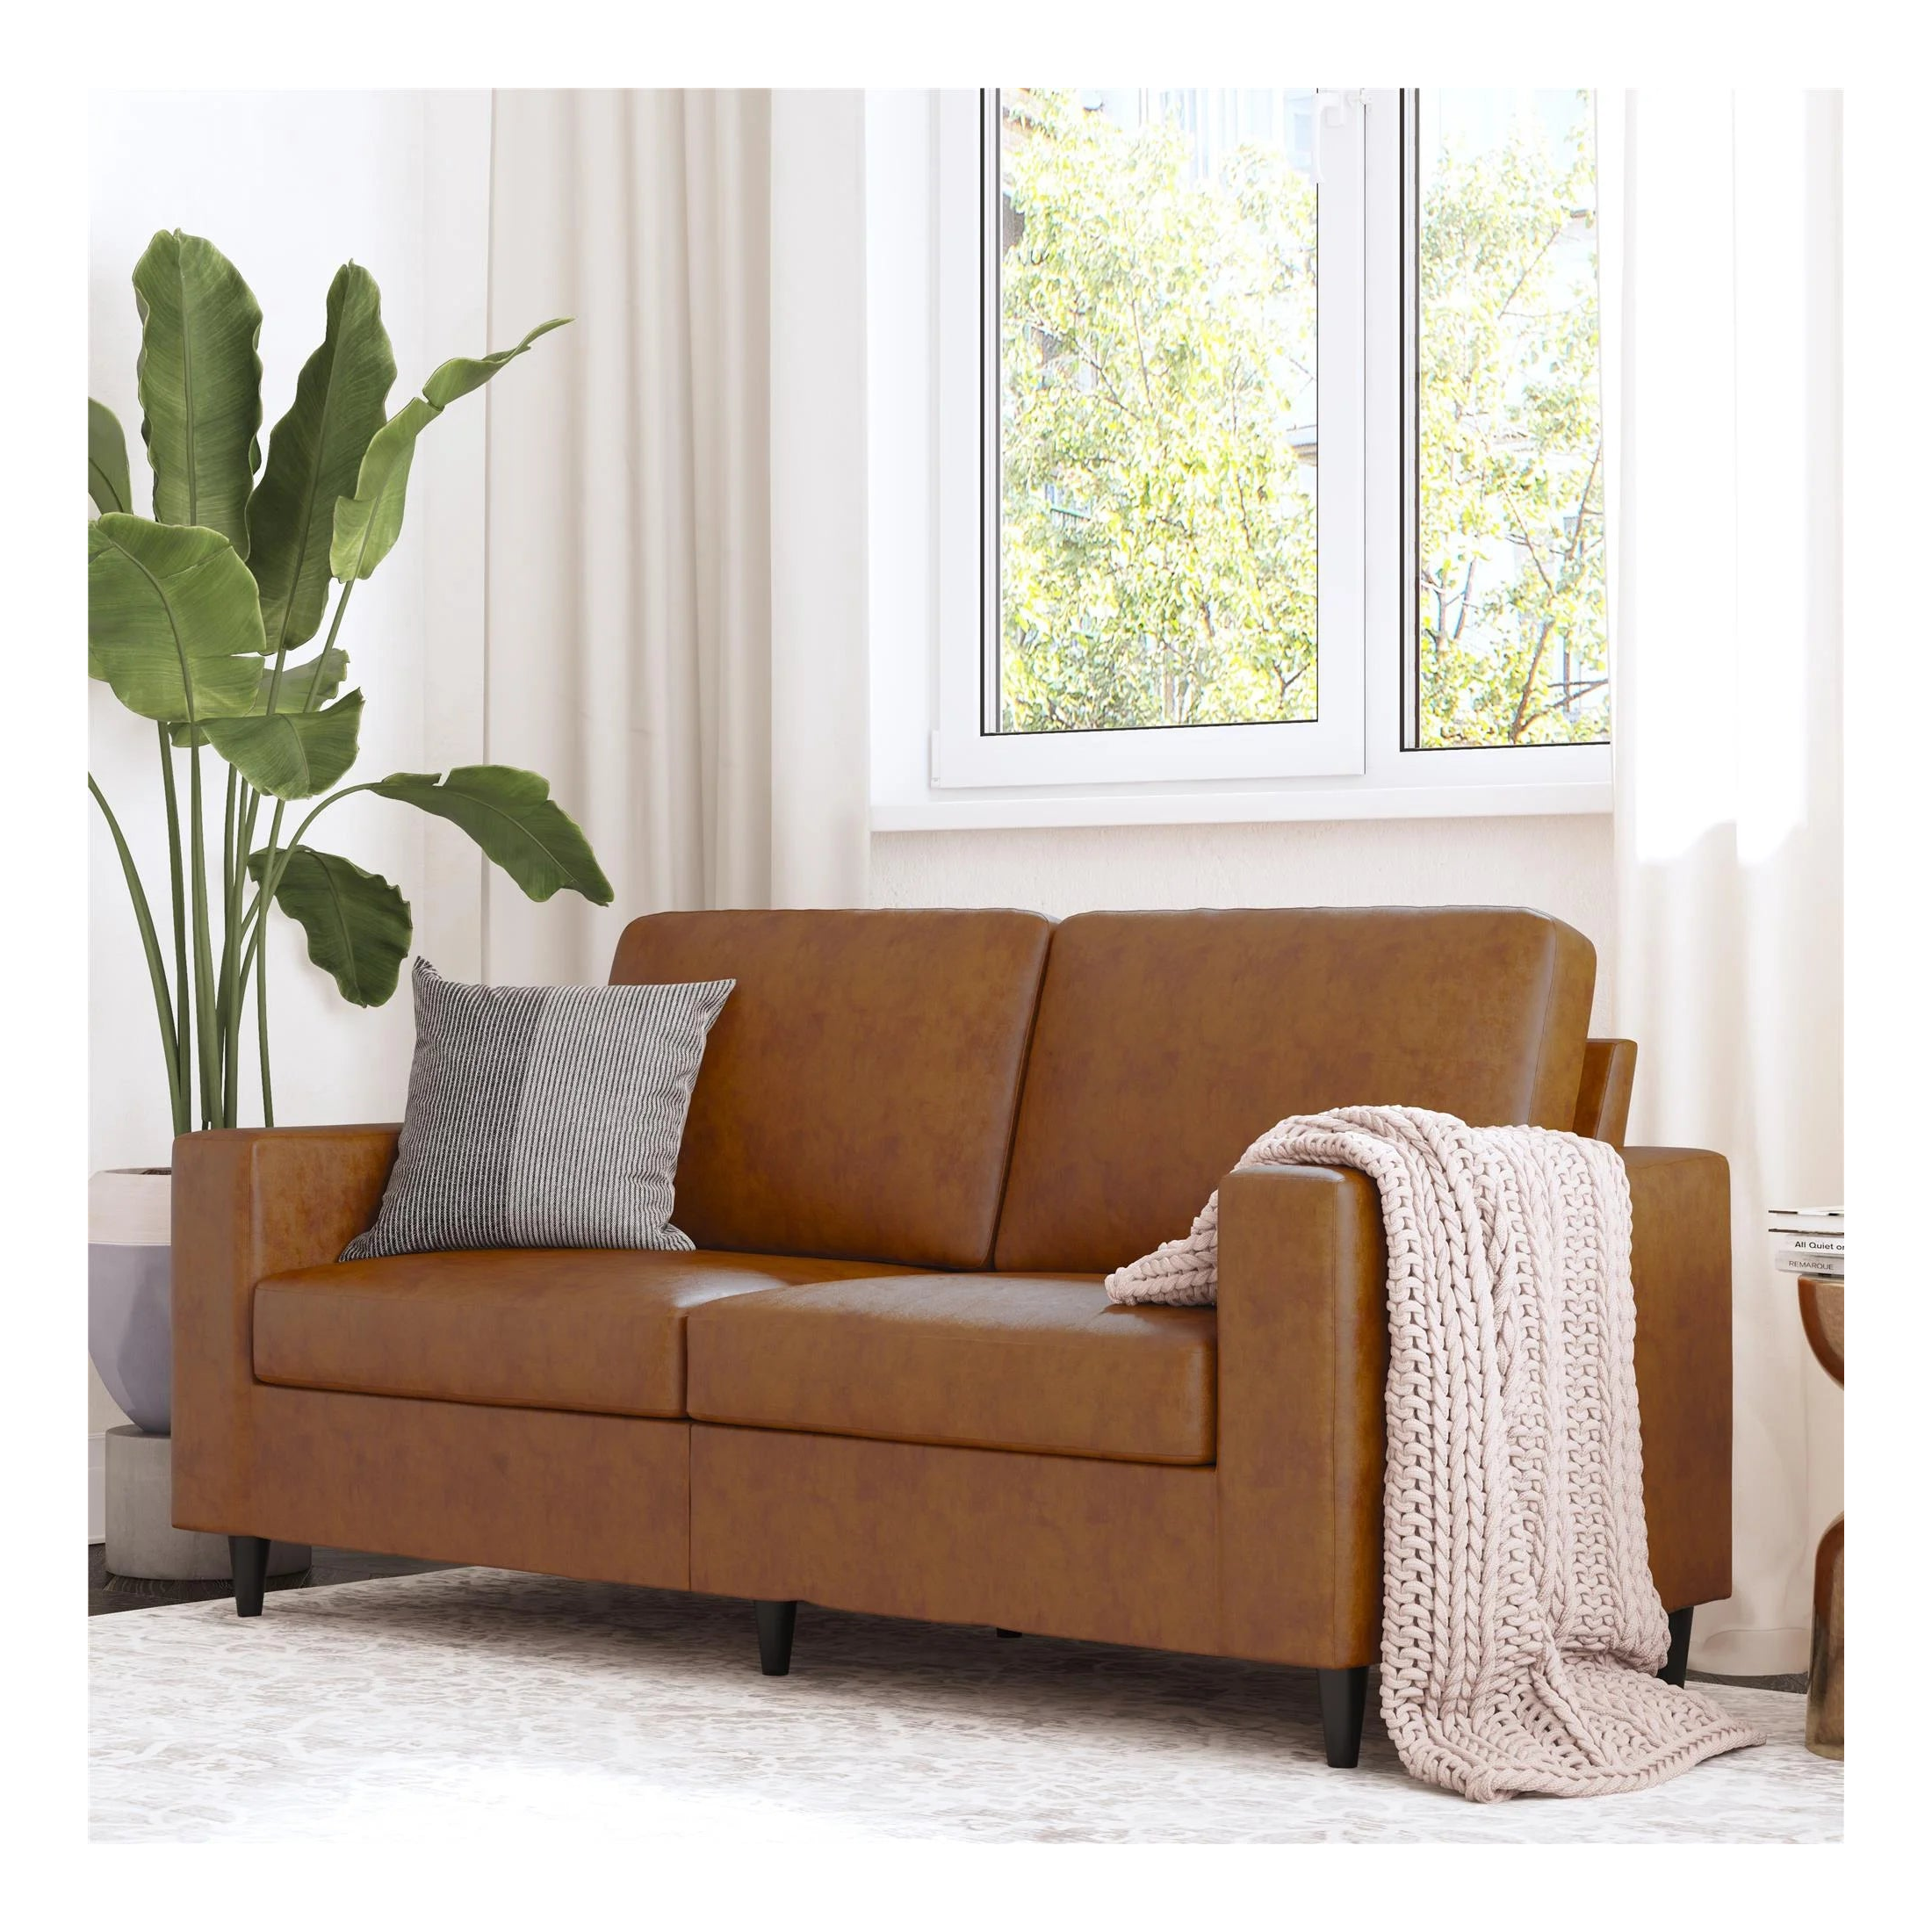 3 Seat Sofas On Sale (3 Colors)